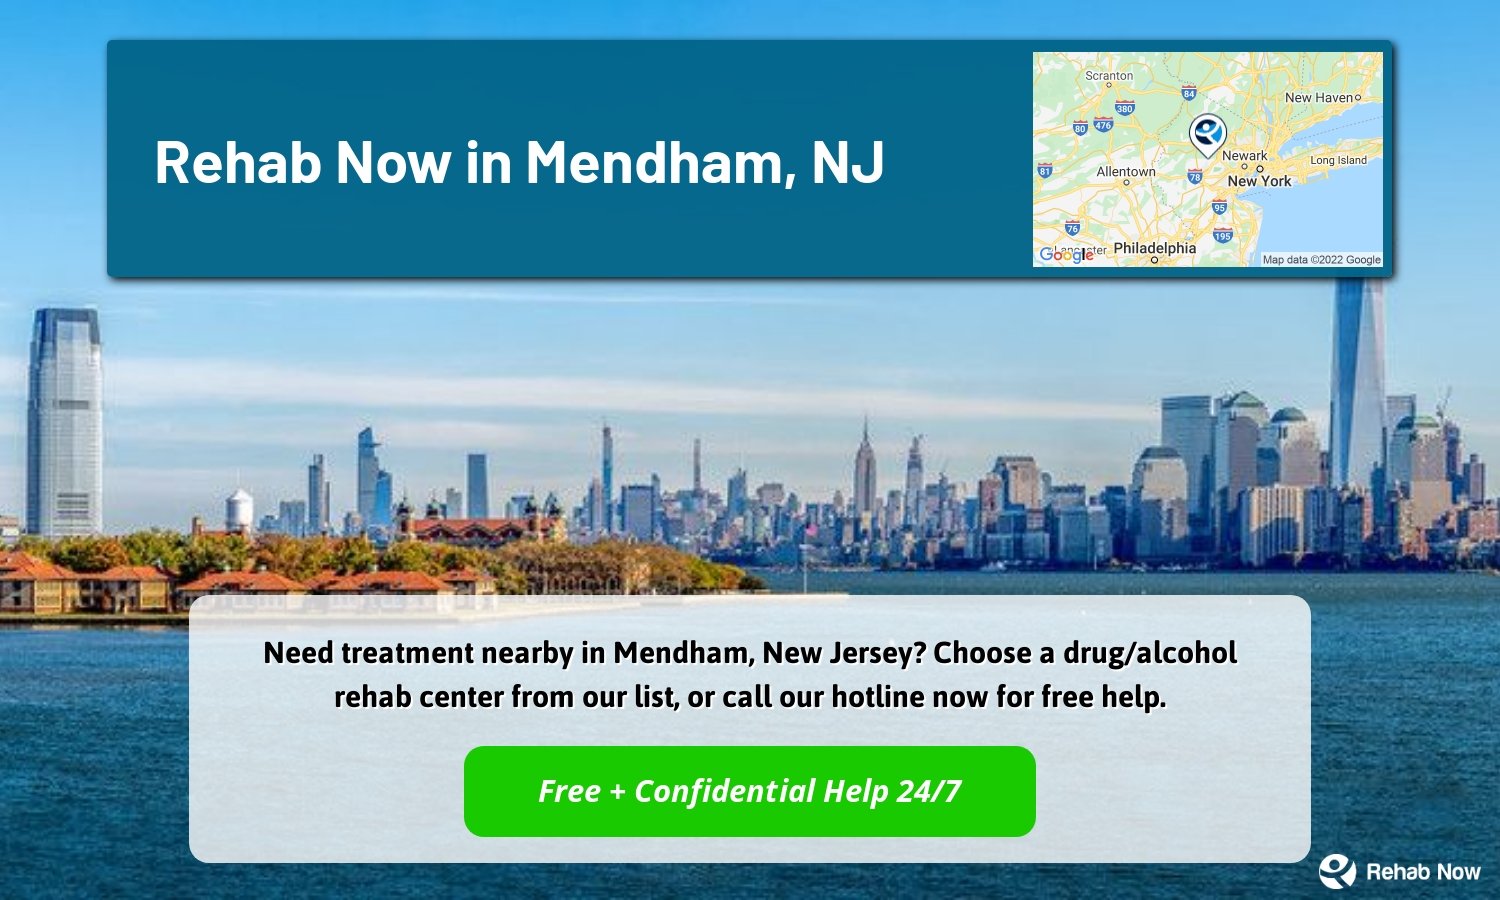 Need treatment nearby in Mendham, New Jersey? Choose a drug/alcohol rehab center from our list, or call our hotline now for free help.